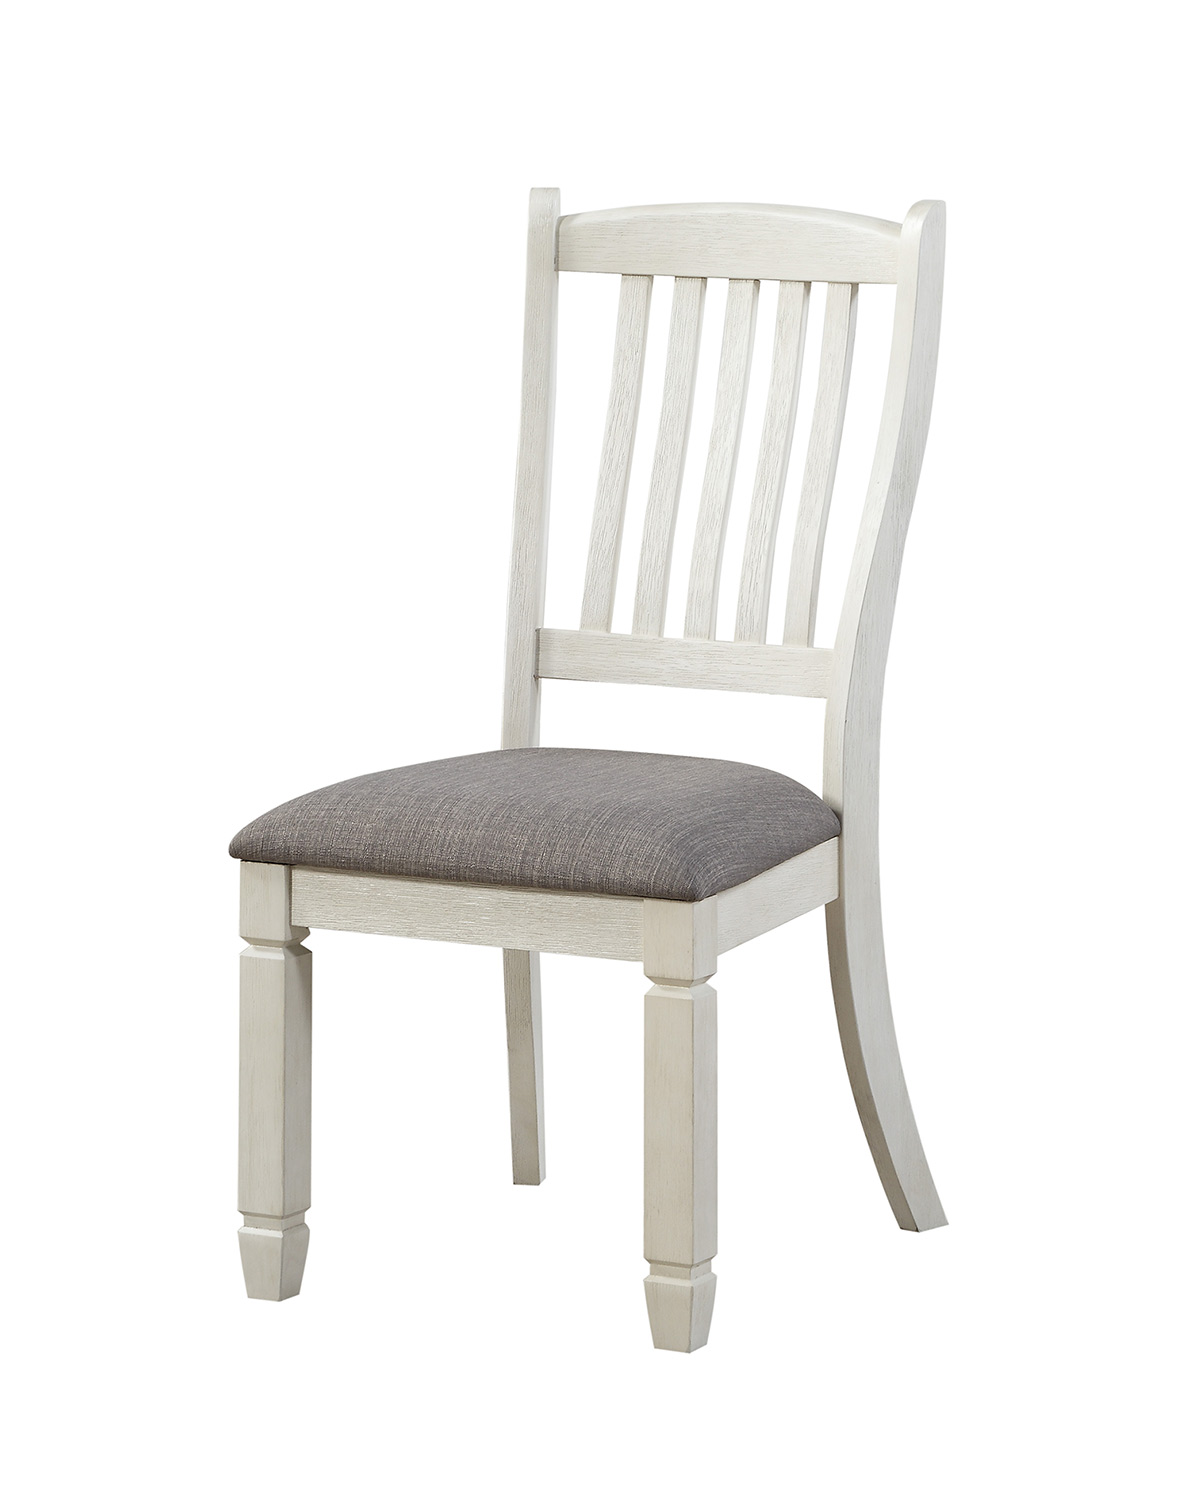 Homelegance Willow Bend Side Chair - Antique White